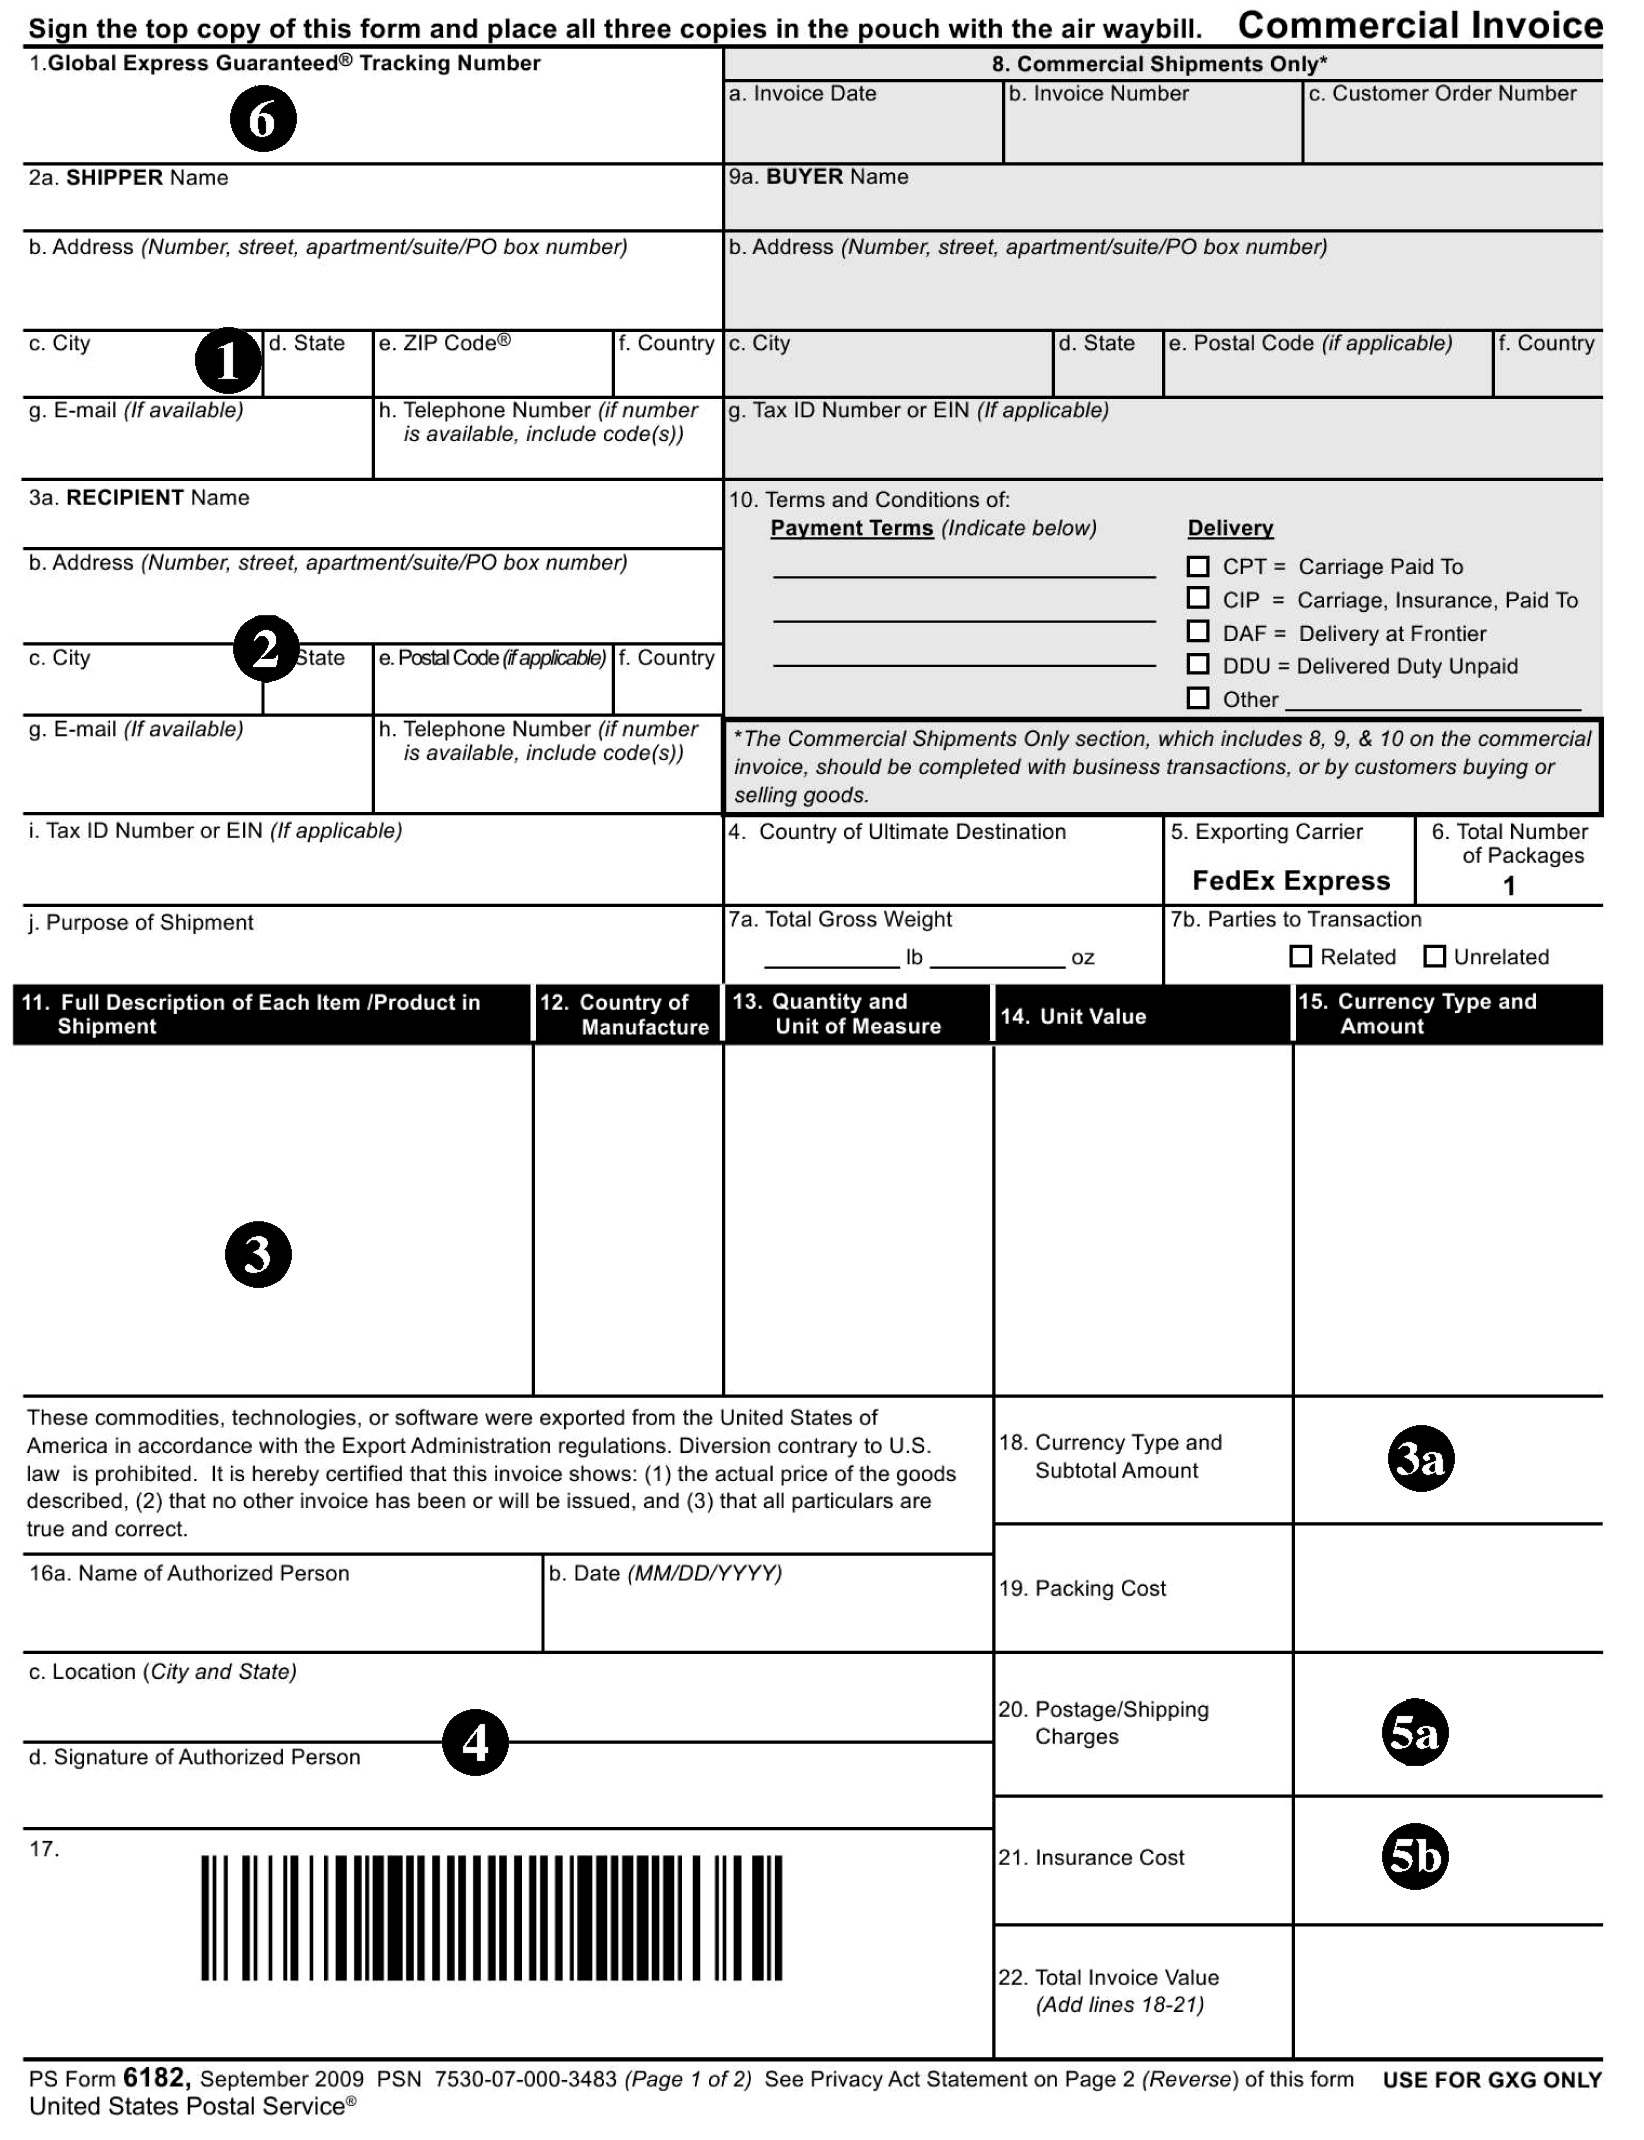 How To Transfer Information From Air Waybill Intended For International Shipping Label Template